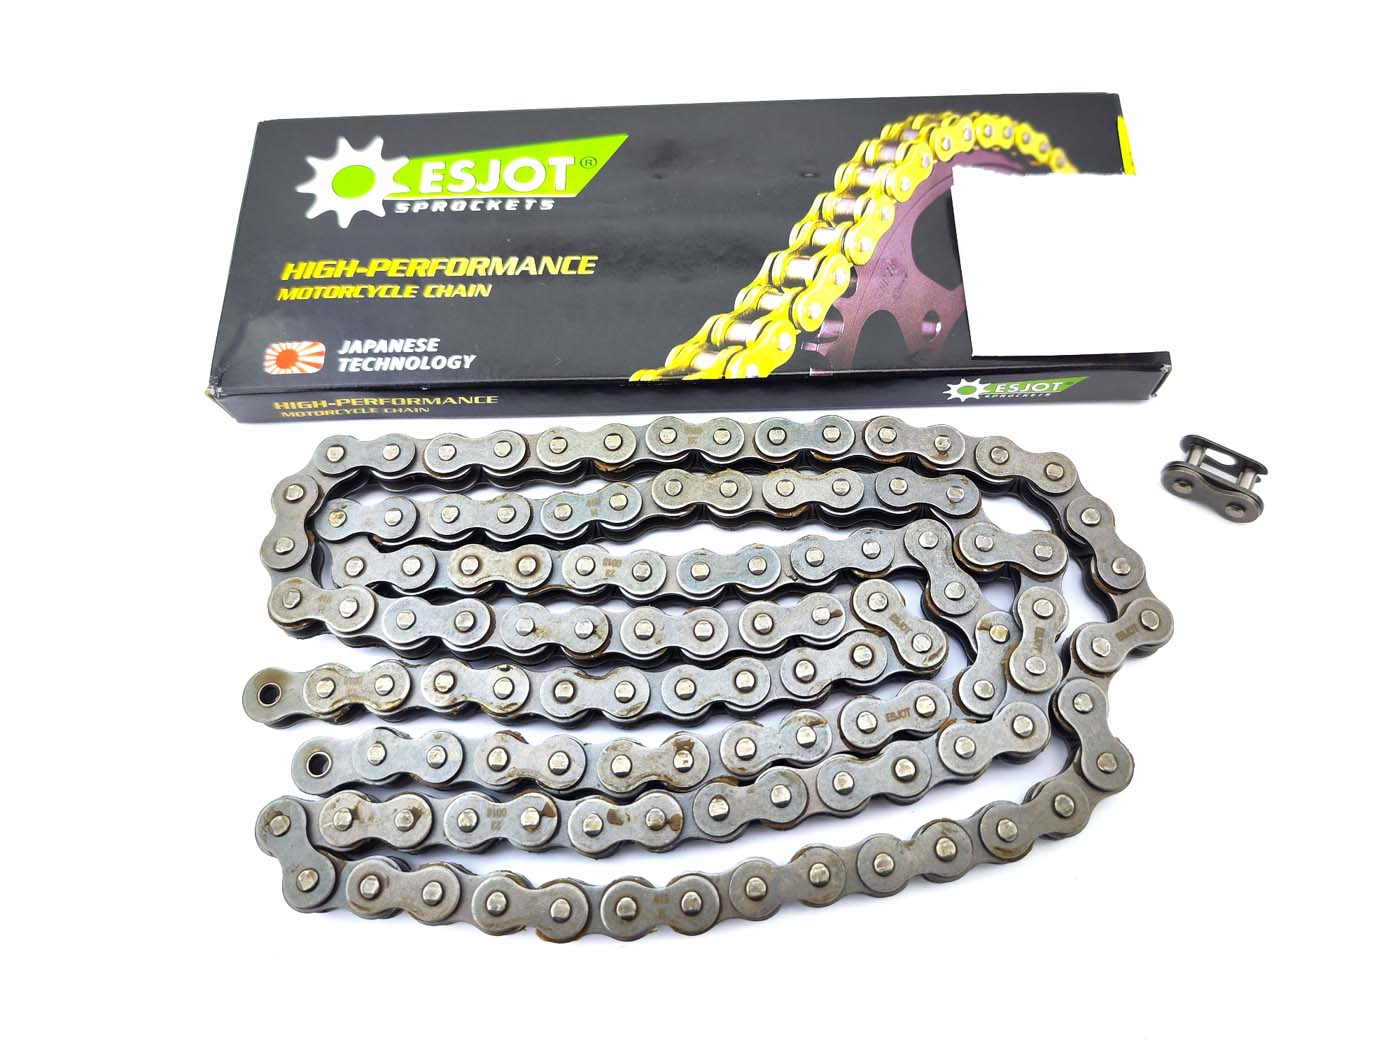 Chain Ejsot 106 Links Reinforced For Motorcycle Moped